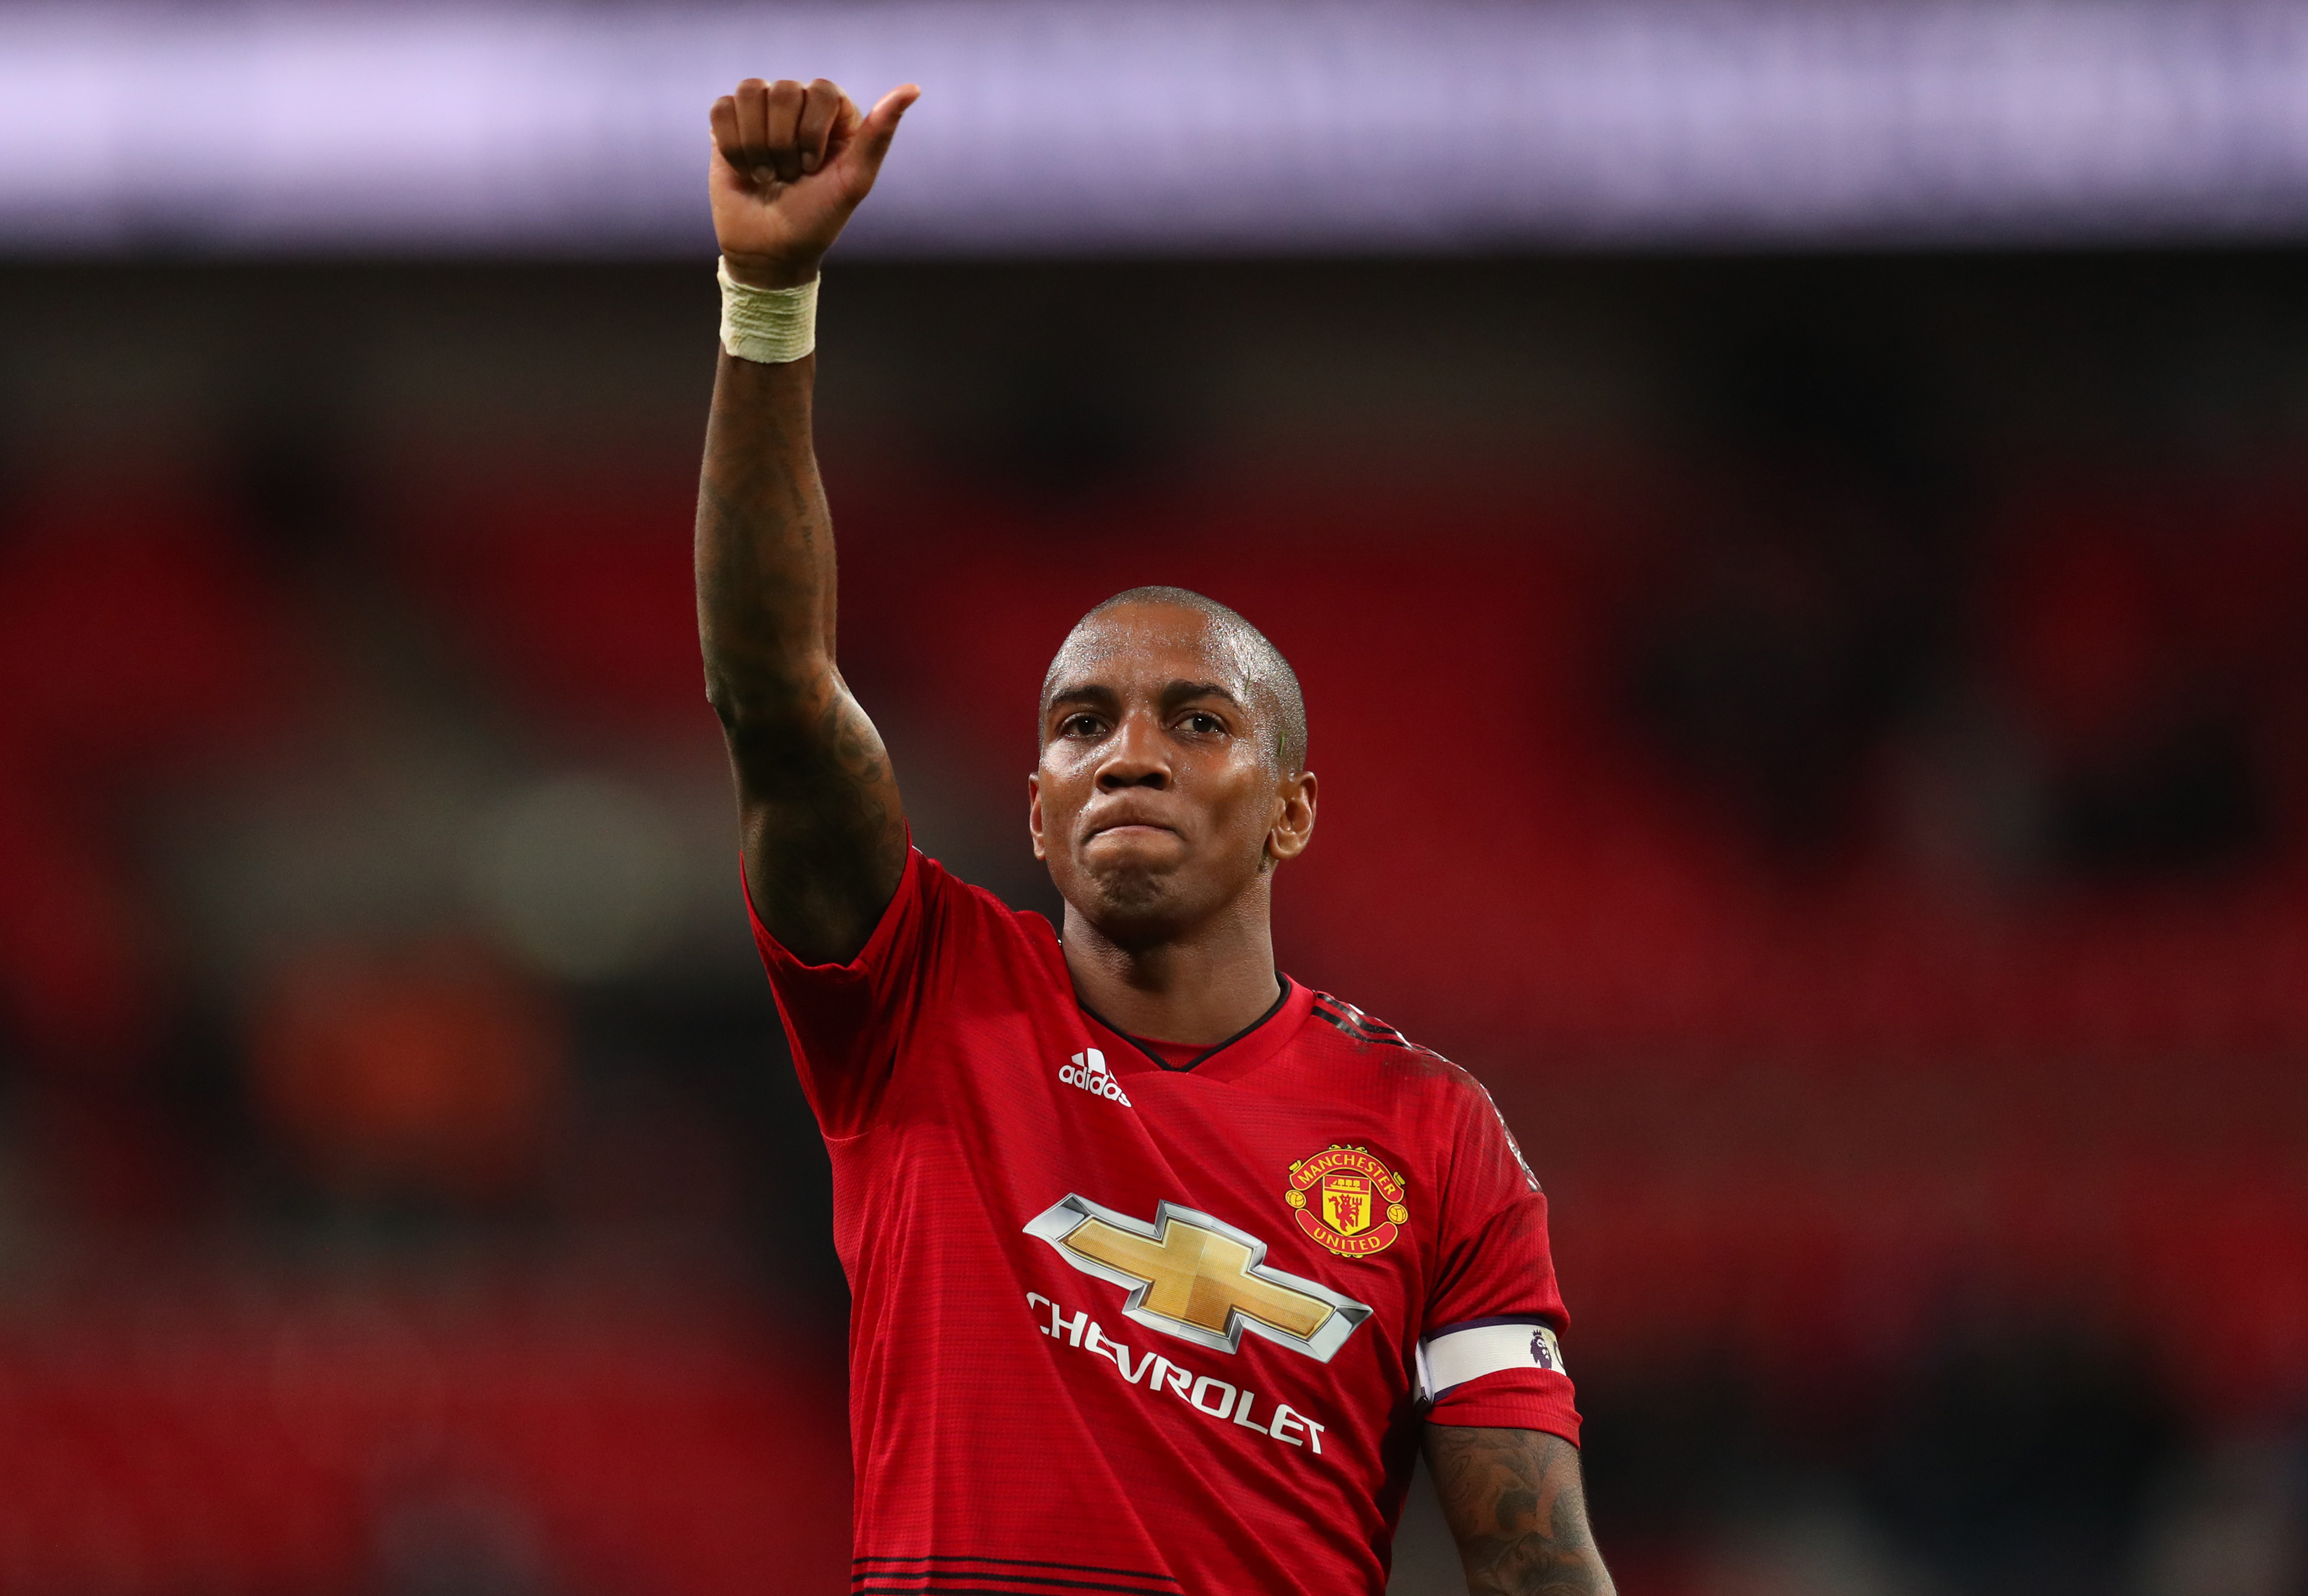 LONDON, ENGLAND - JANUARY 13: A thumbs up from Ashley Young of Manchester United after the Premier League match between Tottenham Hotspur and Manchester United at Wembley Stadium on January 13, 2019 in London, United Kingdom. (Photo by Catherine Ivill/Getty Images)